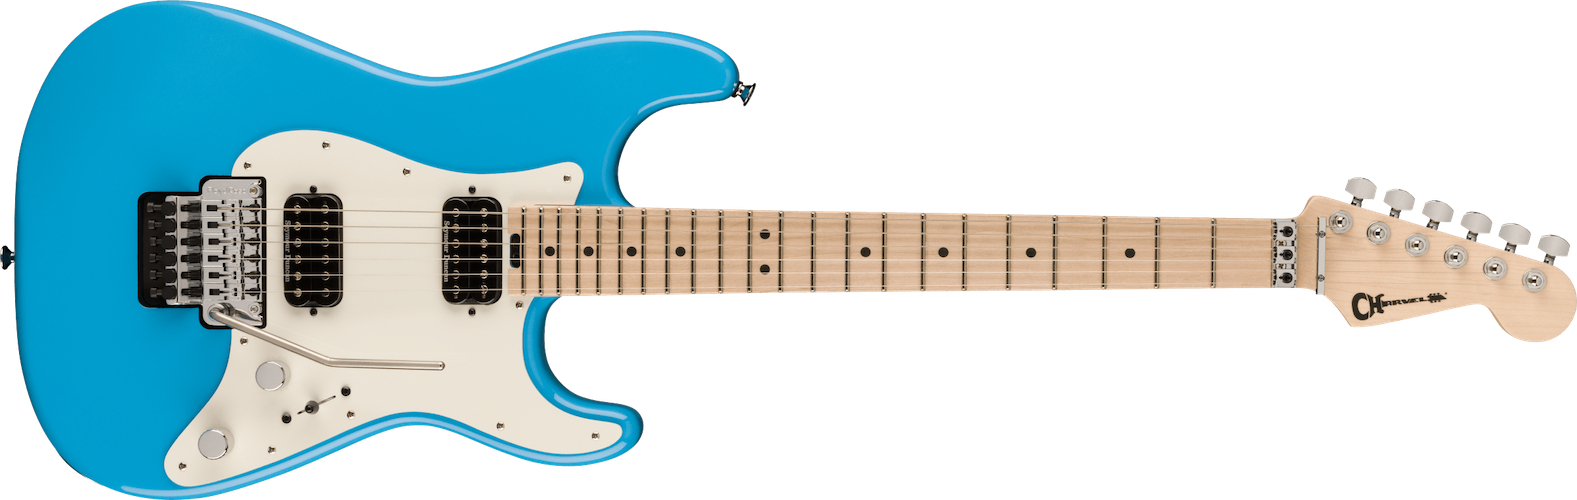 Charvel Pro-Mod So-Cal Style 1 HH FR M, Maple Fingerboard, Infinity Blue